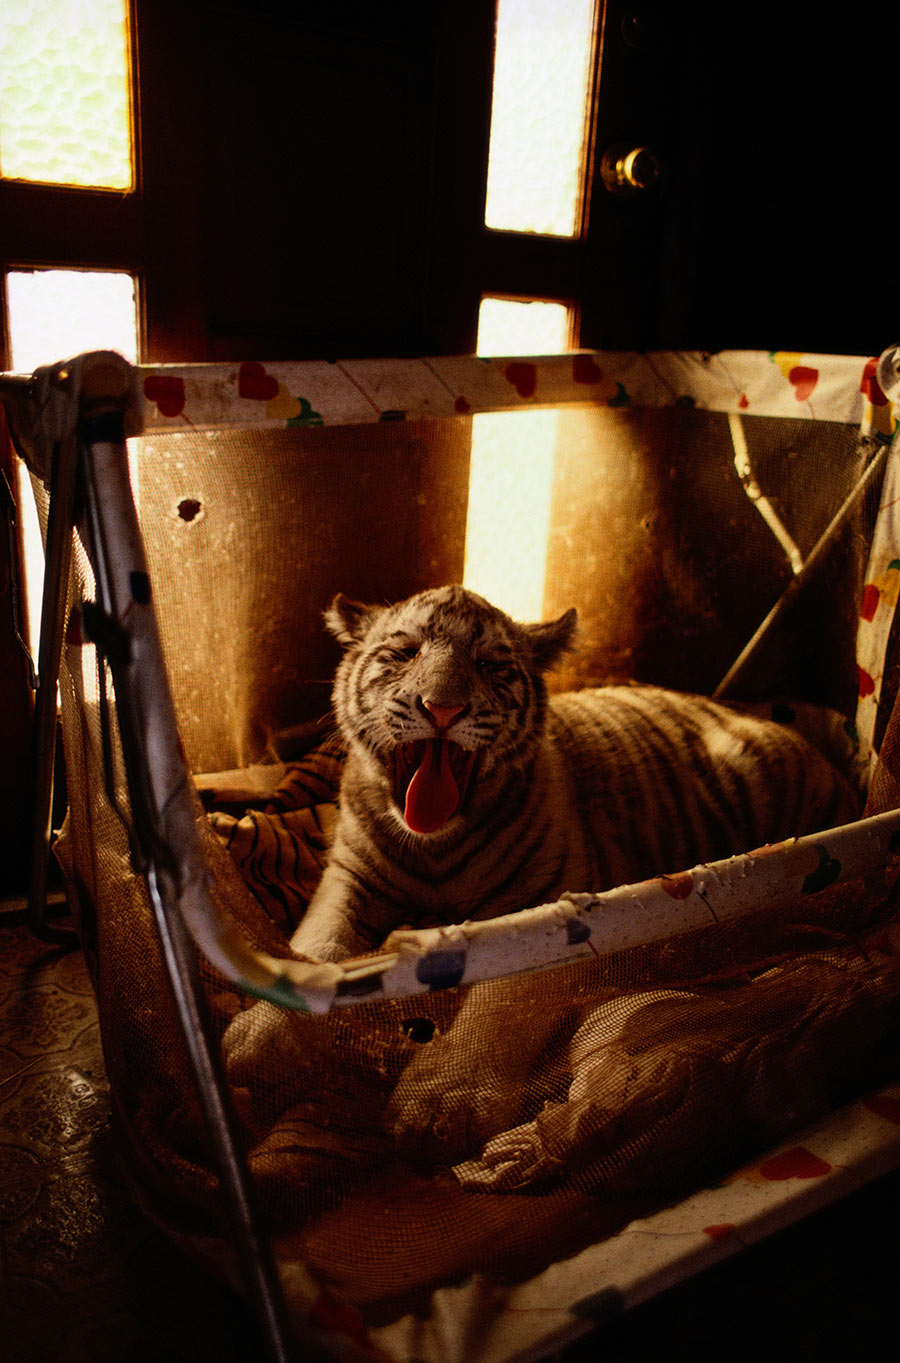 Siberian tiger cub in a child’s play-pen, which is being used as a bed, Arkansas, November 1997. Photograph by Nick Nichols, National Geographic